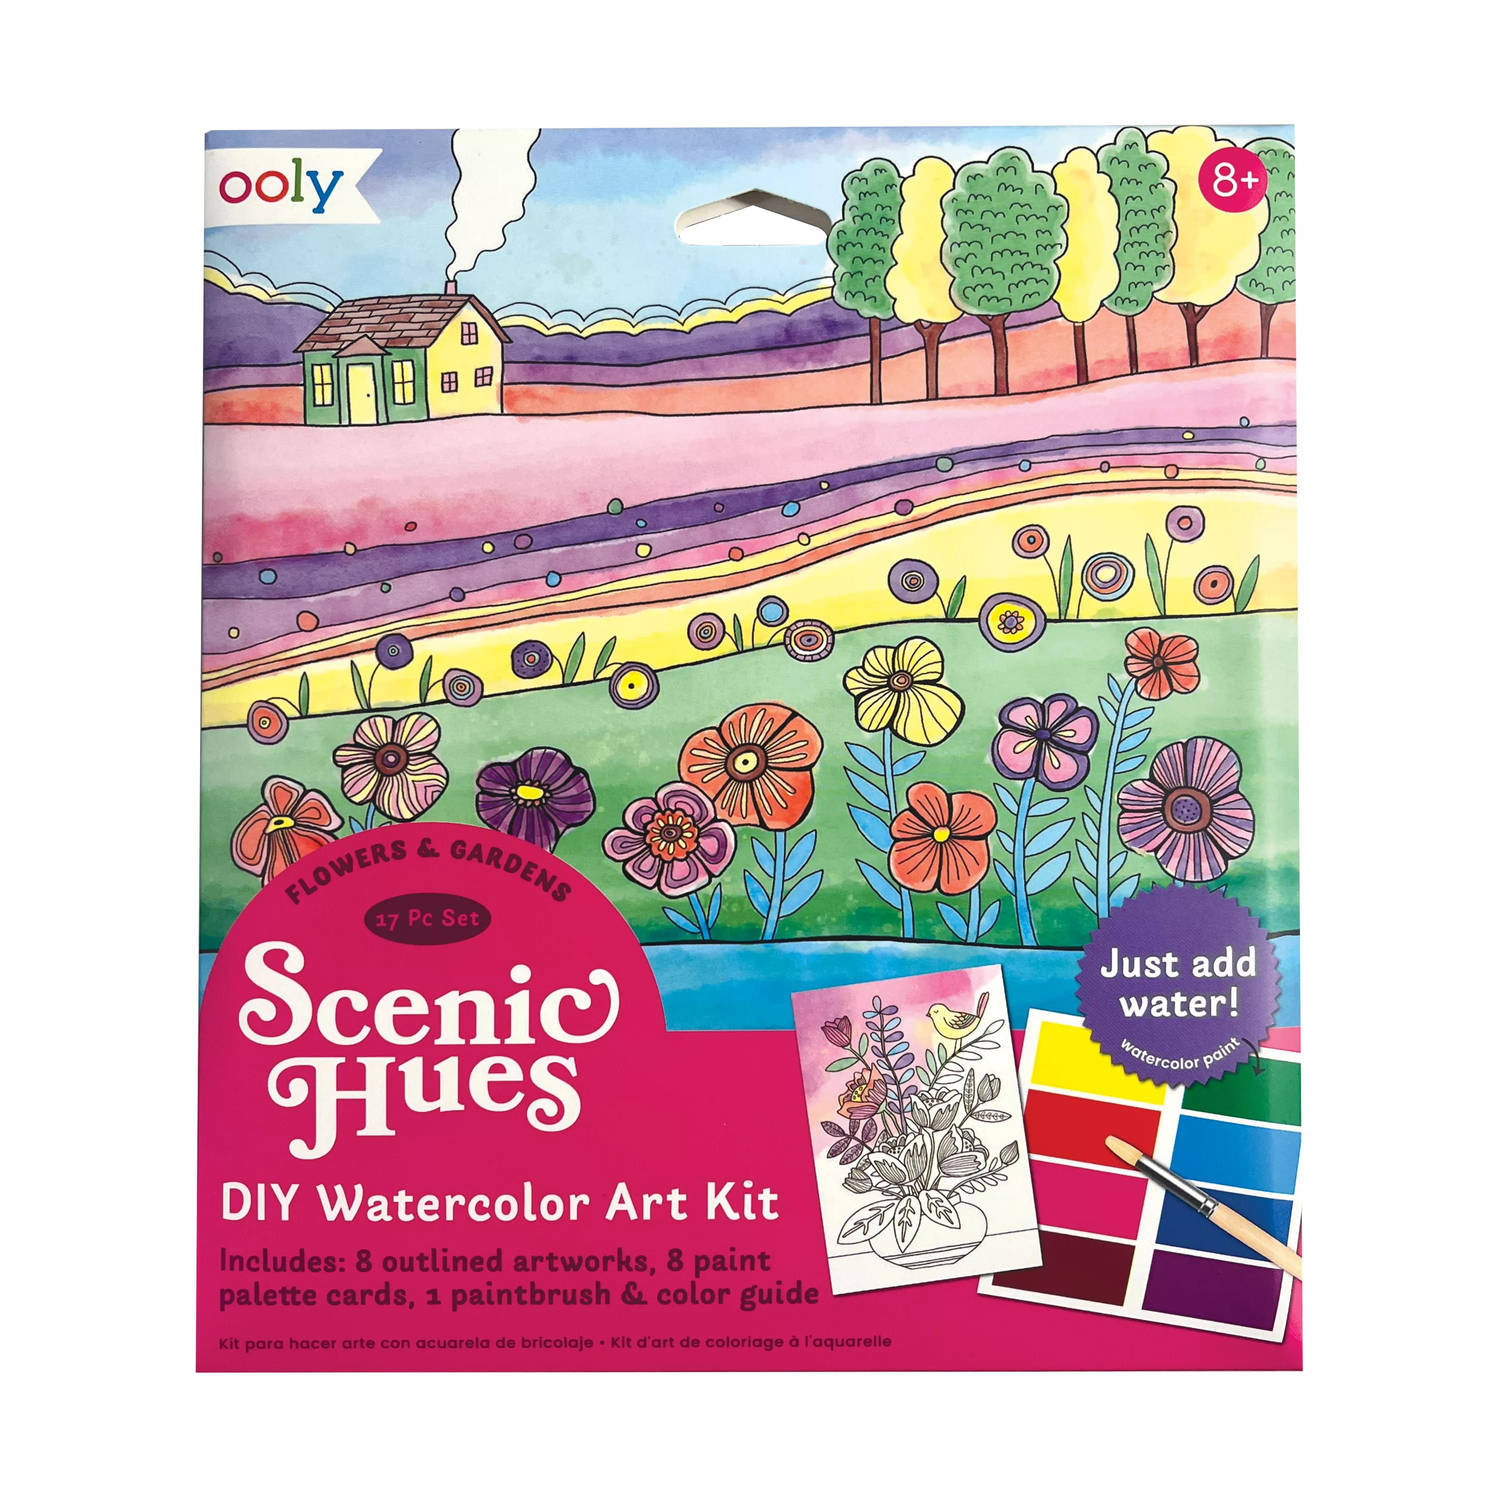 Ooly - Scenic Hues D.I.Y. Watercolor Art Kit - Flowers & Gardens (17 PC Set)